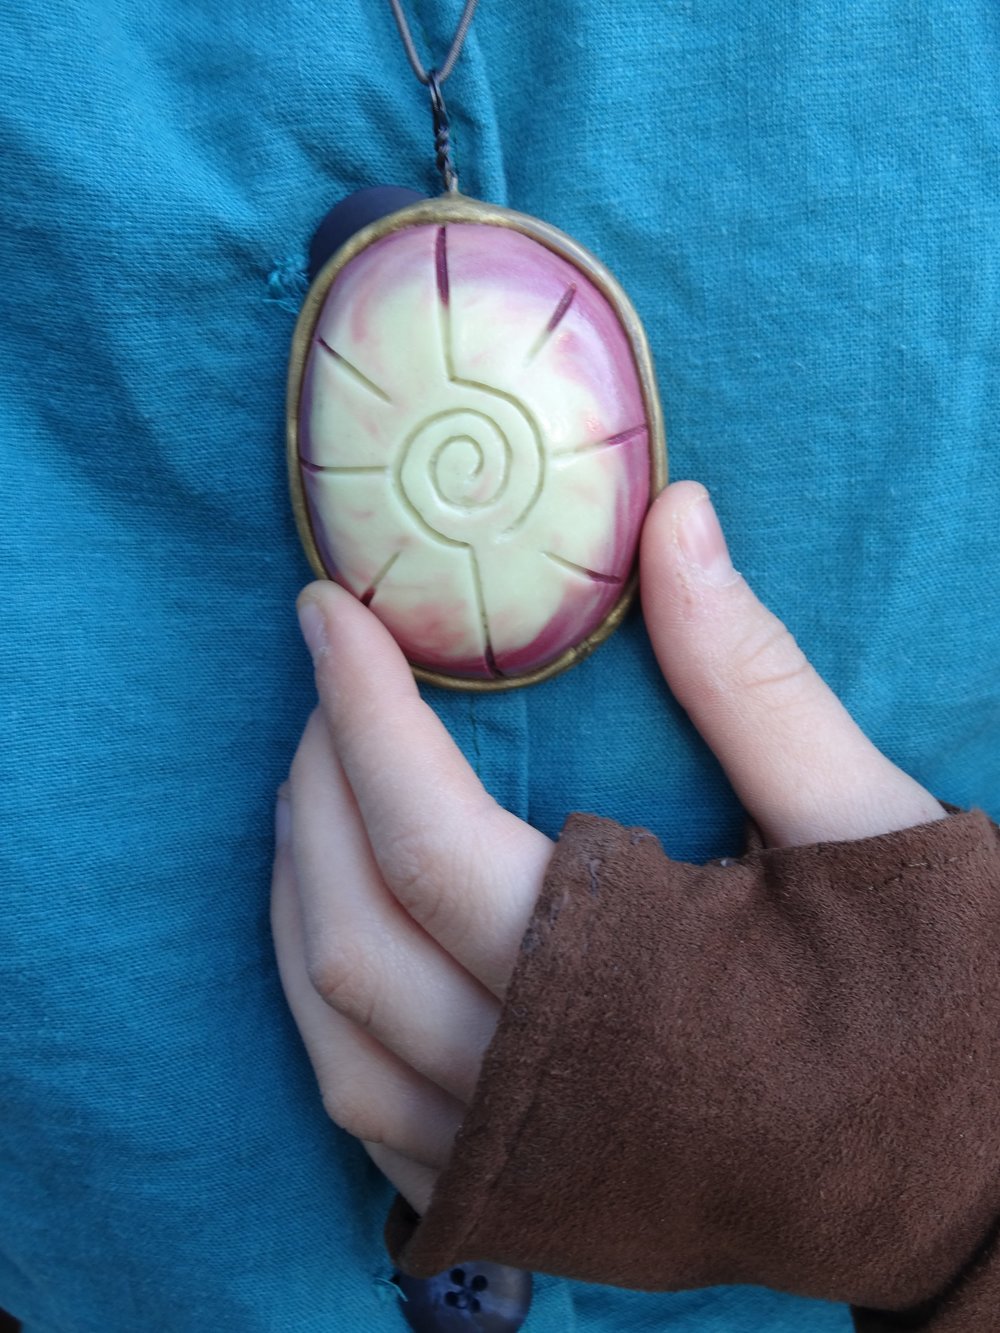  I made the amulet from Sculpey (I combined regular Sculpey with the glow-in-the-dark variety so at least it glowed some of the time).  